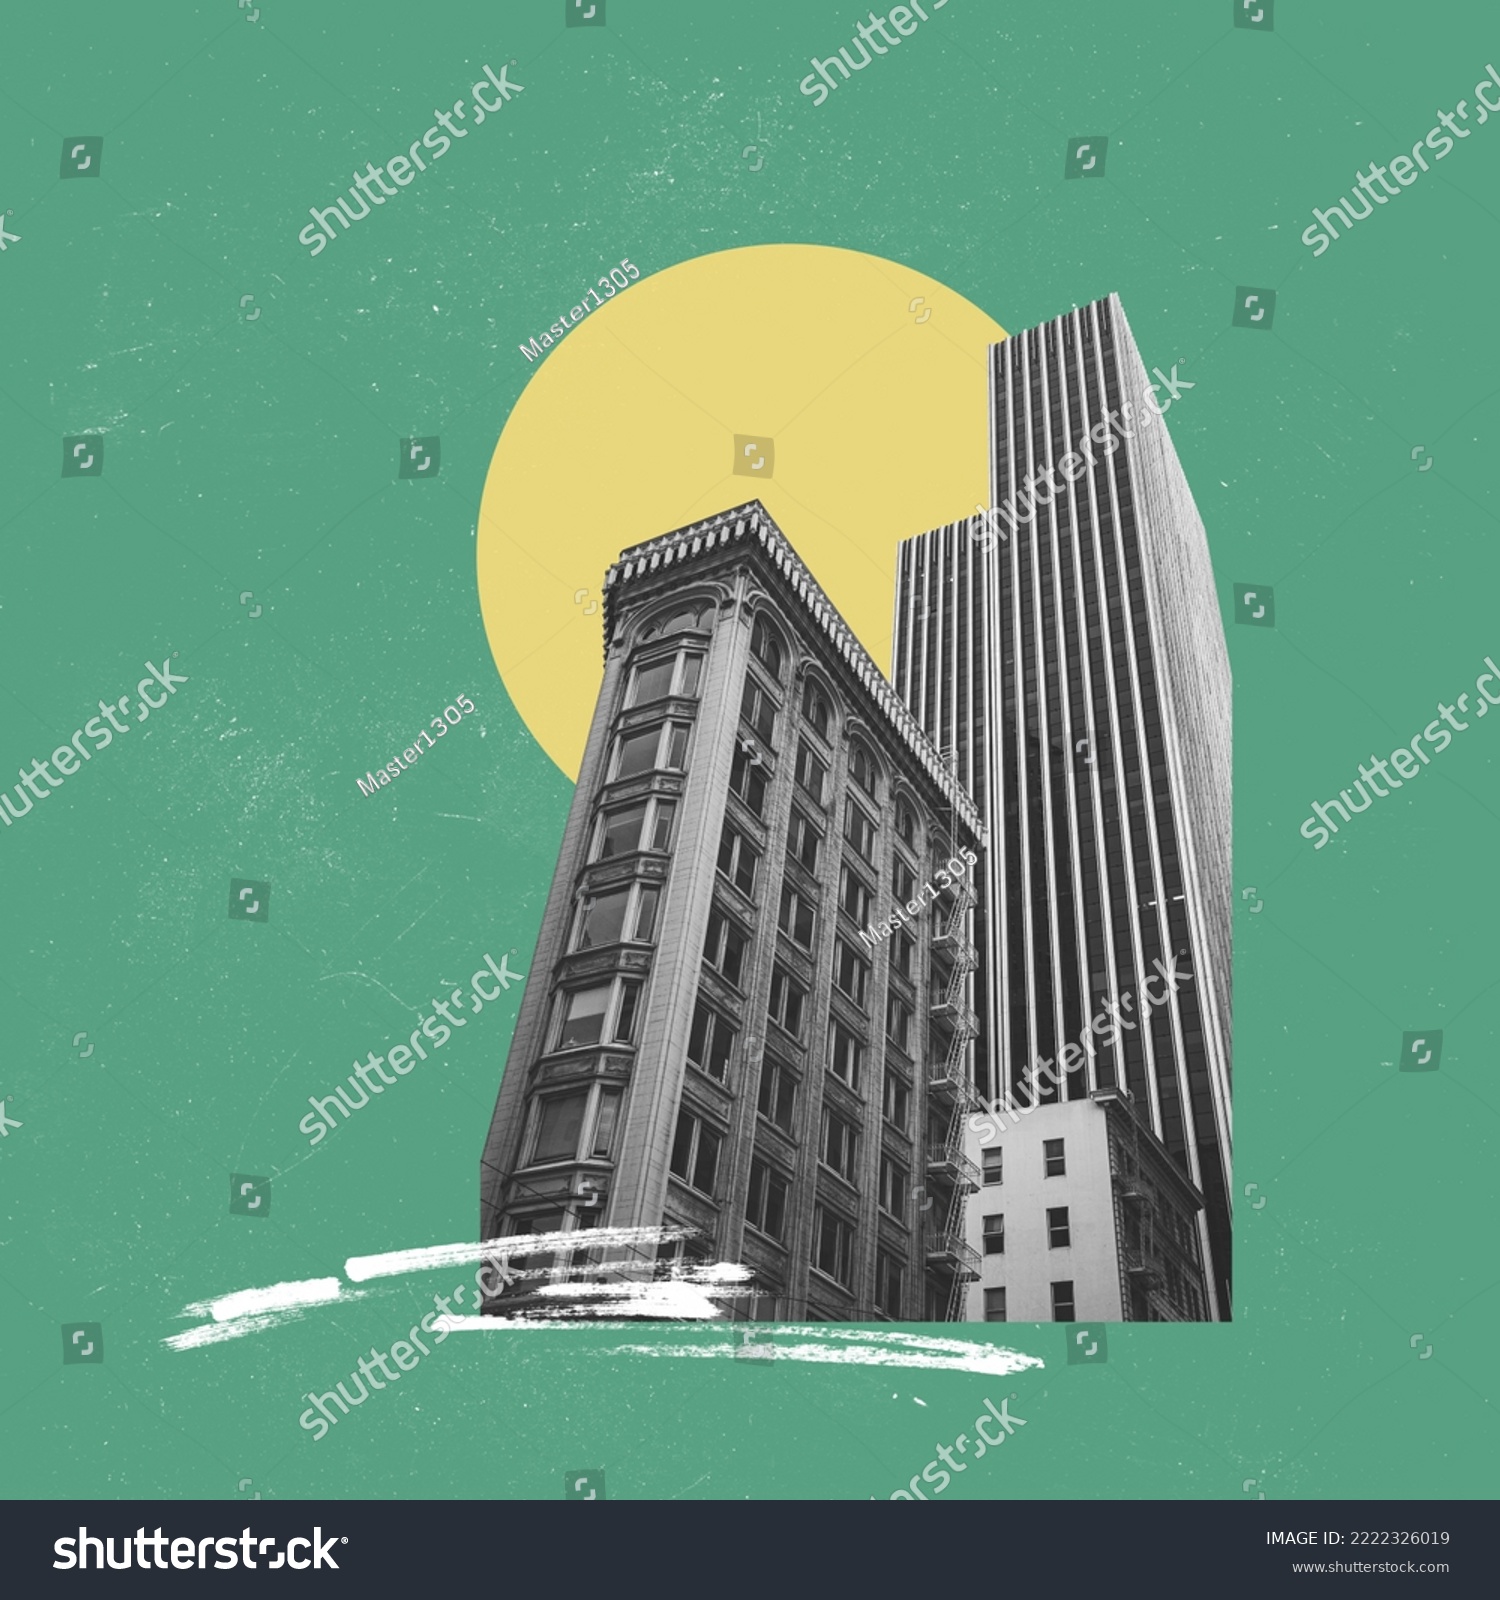 Contemporary artwork. Creative design in retro style. Black and white image of building in big city. Modern and vintage. Concept of creativity, surrealism, imagination, futuristic landscape. Poster #2222326019